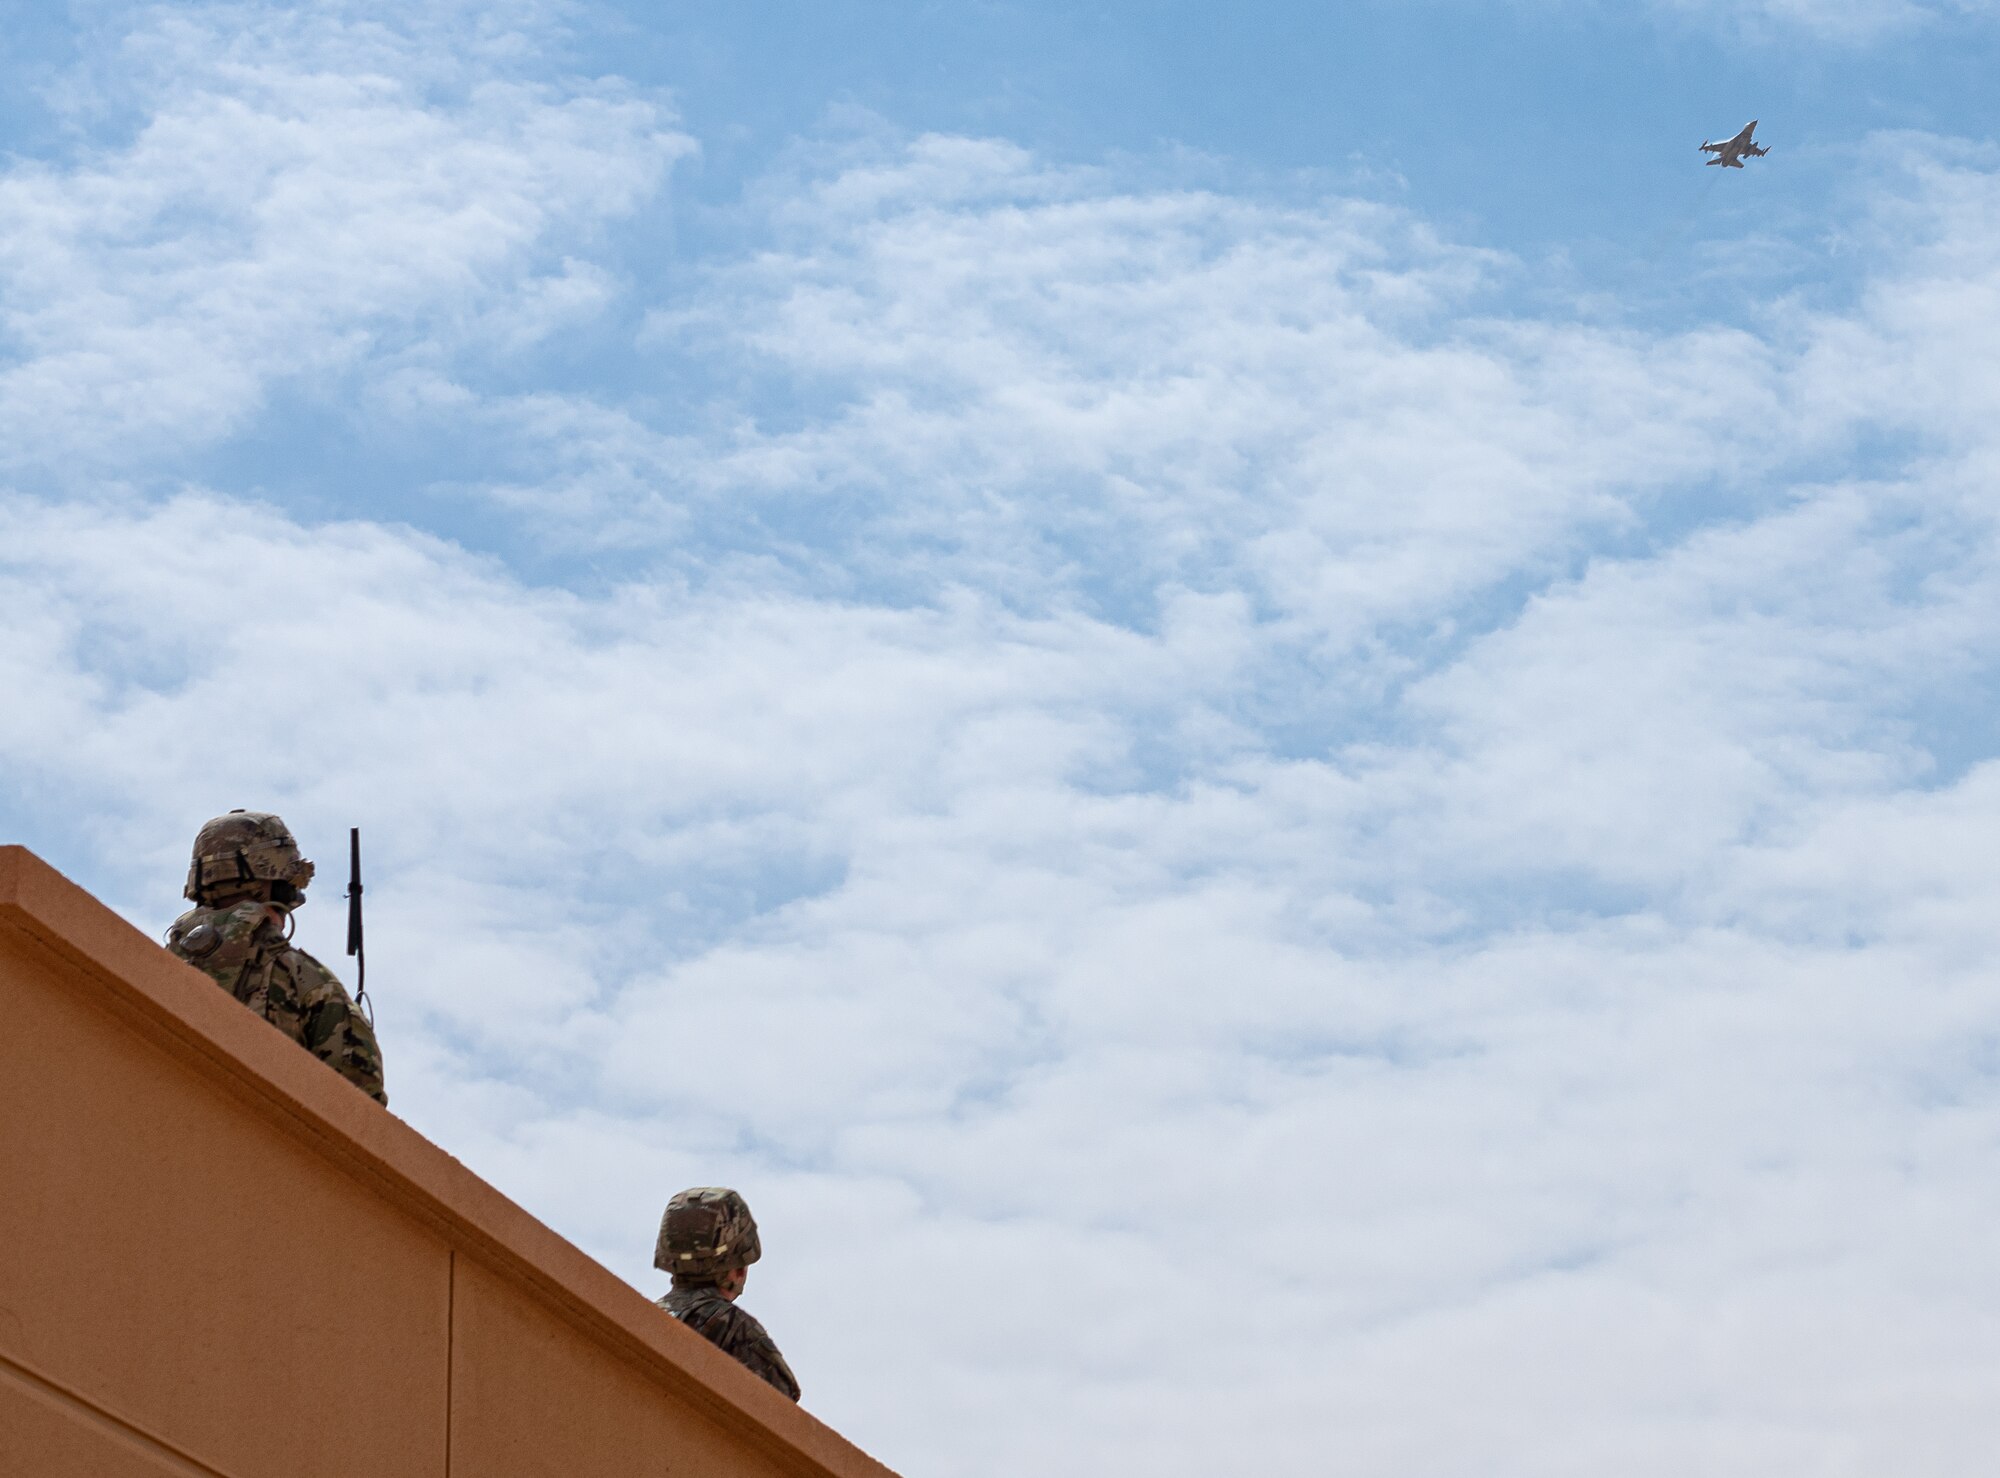 U.S. Army 2nd Brigade 1st Armored Division, 1-35 Armor Battalion, Joint Fires Observers and pilots from the 77th Expeditionary Fighter Squadron conduct close air support training recently, at Prince Sultan Air Base, Kingdom of Saudi Arabia.